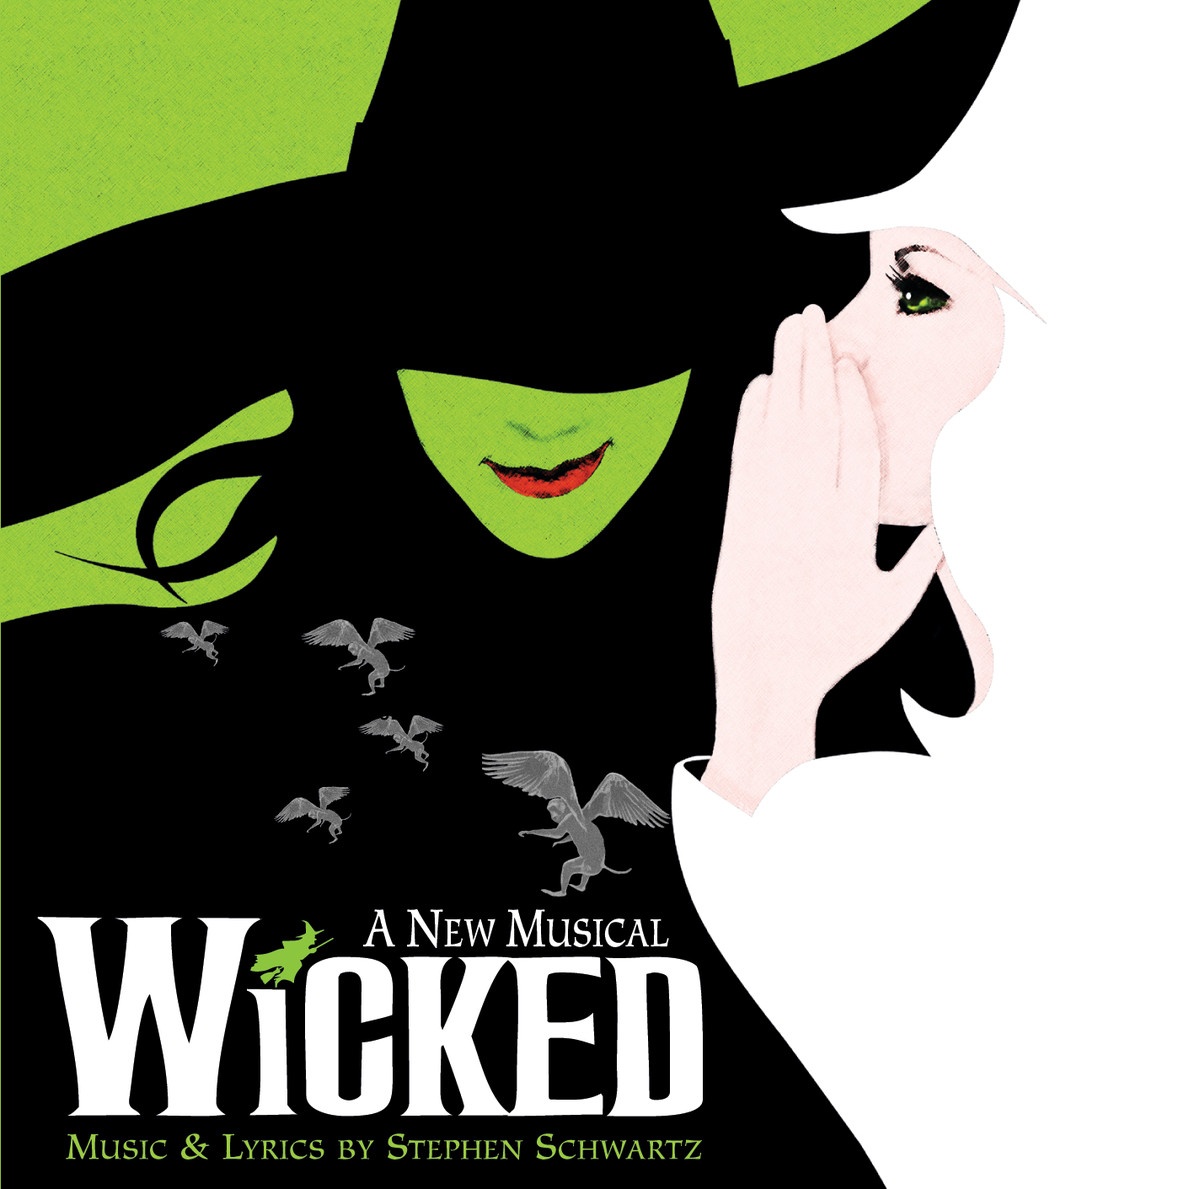 Something Bad - From "Wicked" Original Broadway Cast Recording/2003